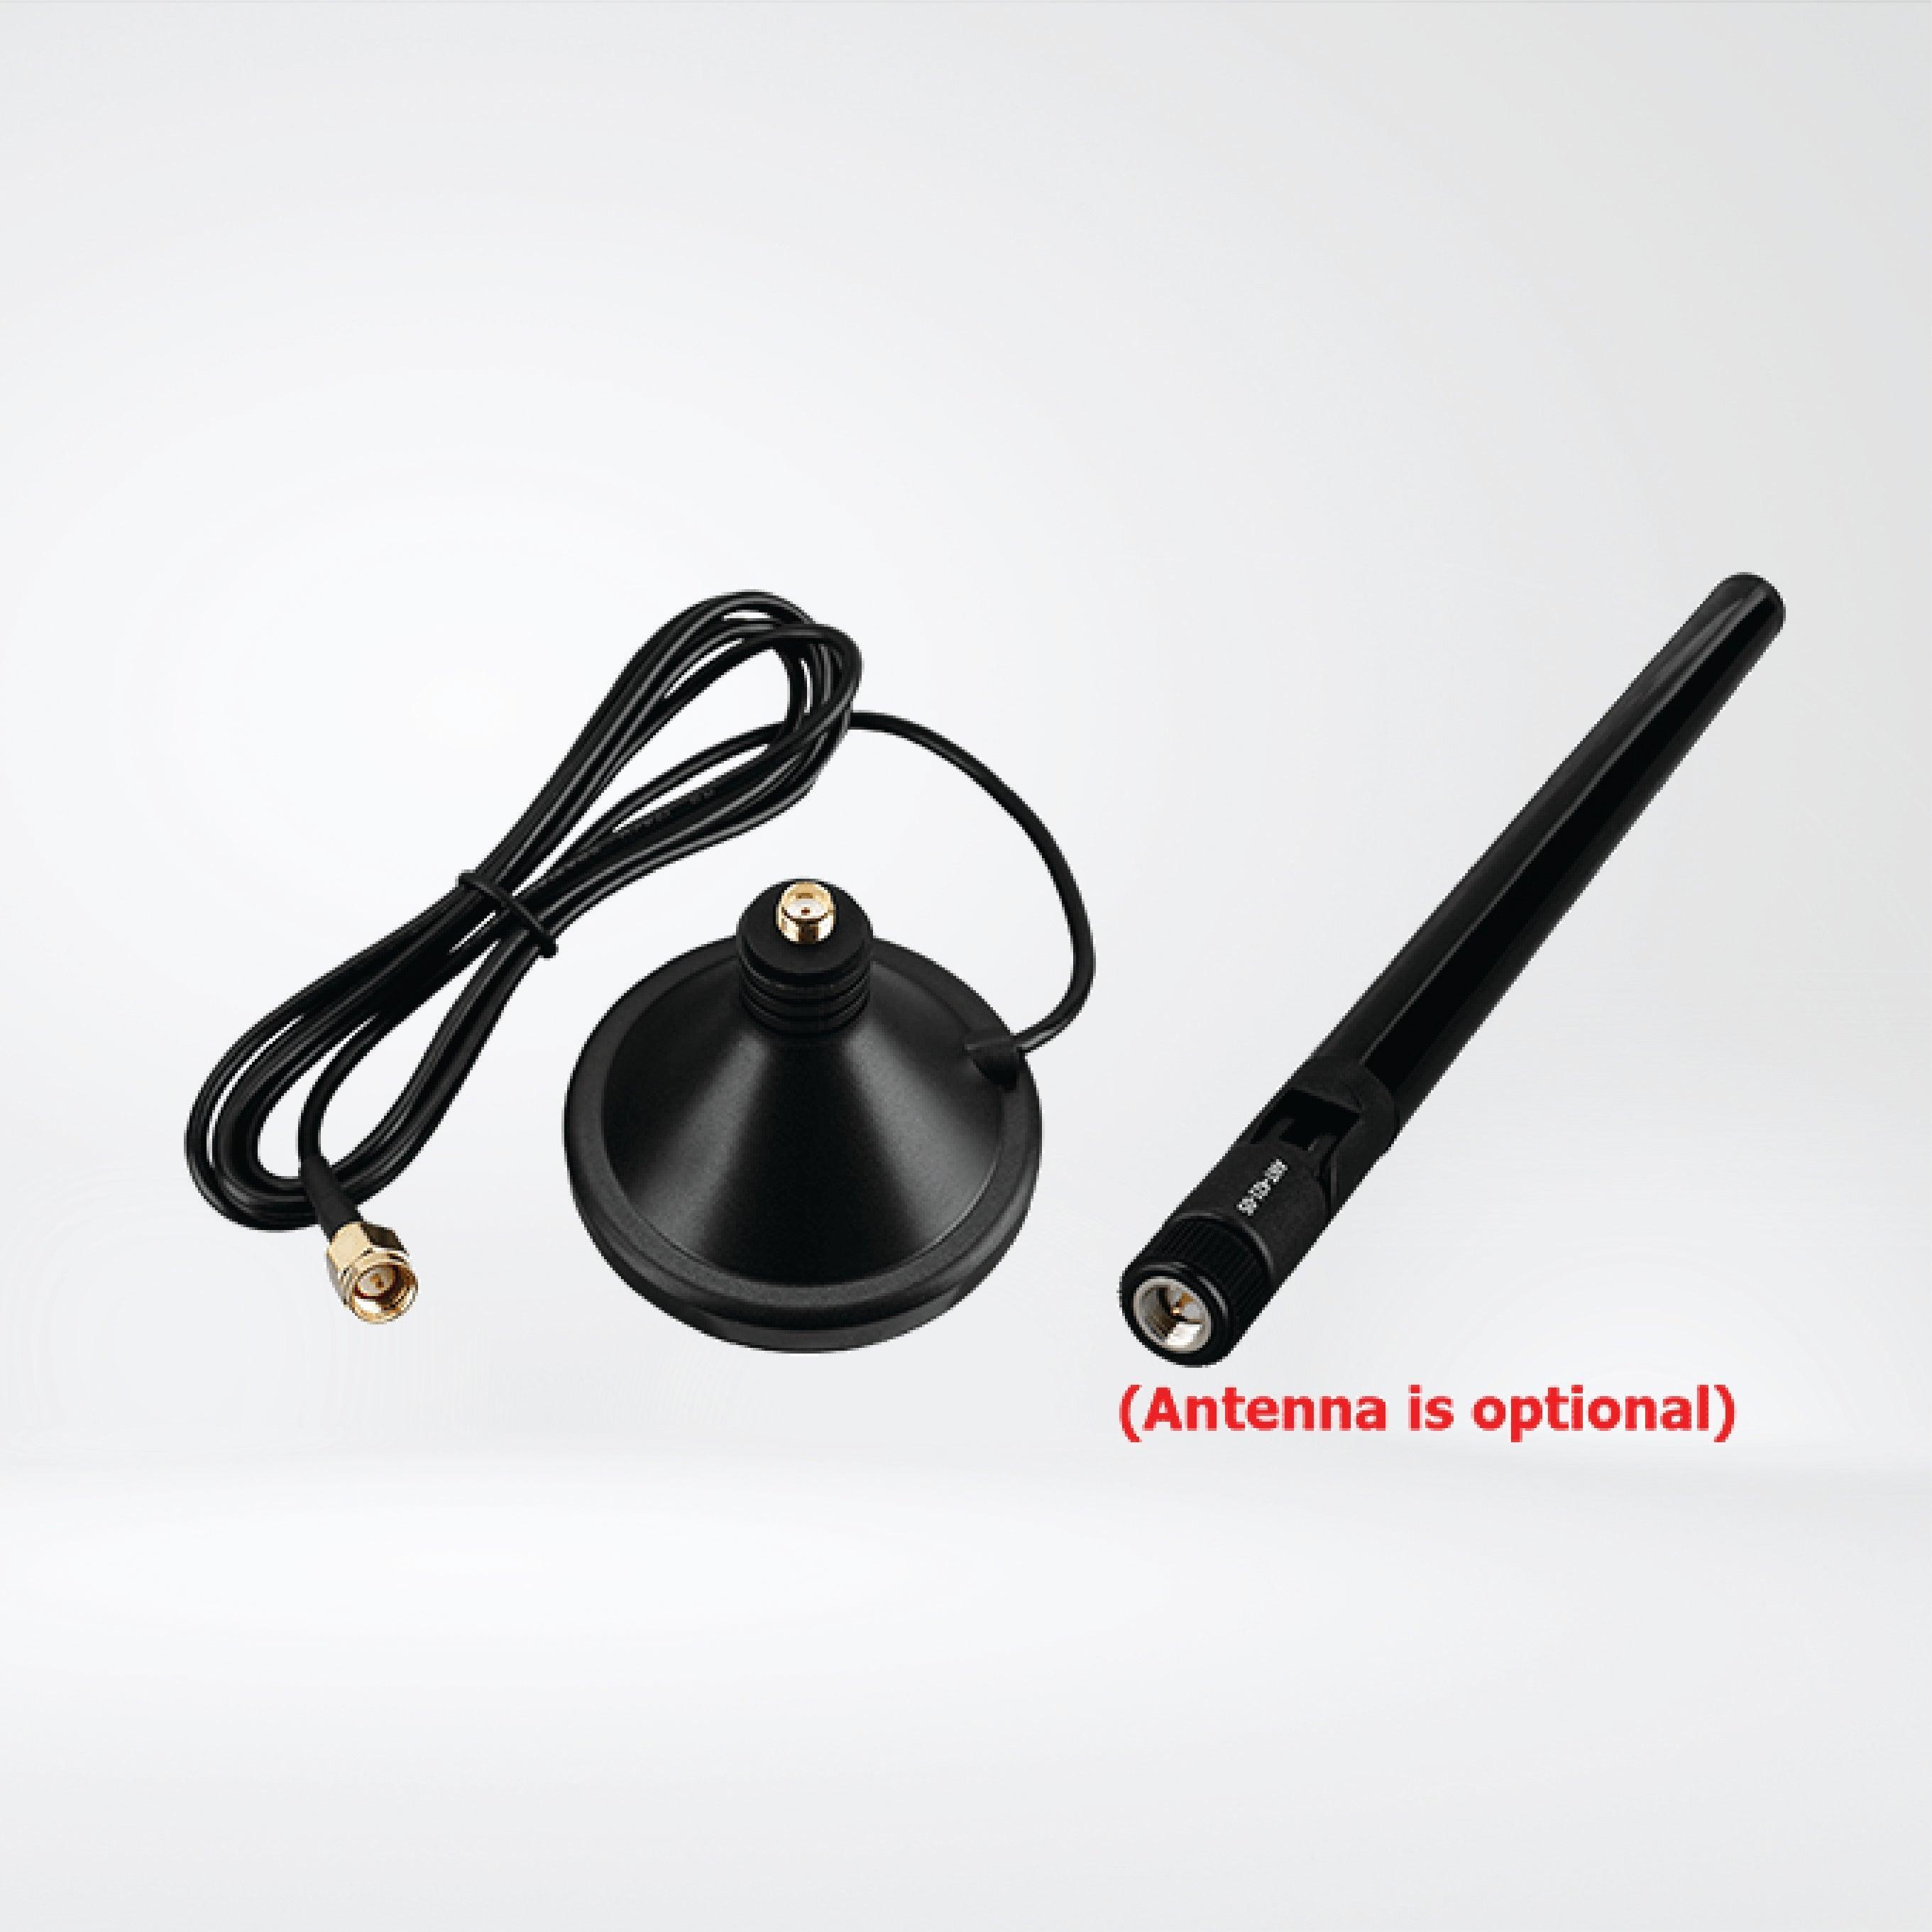 ANT-Base-01 Antenna magnetic base with 1.5M cable (SMA Male Plug) - Riverplus